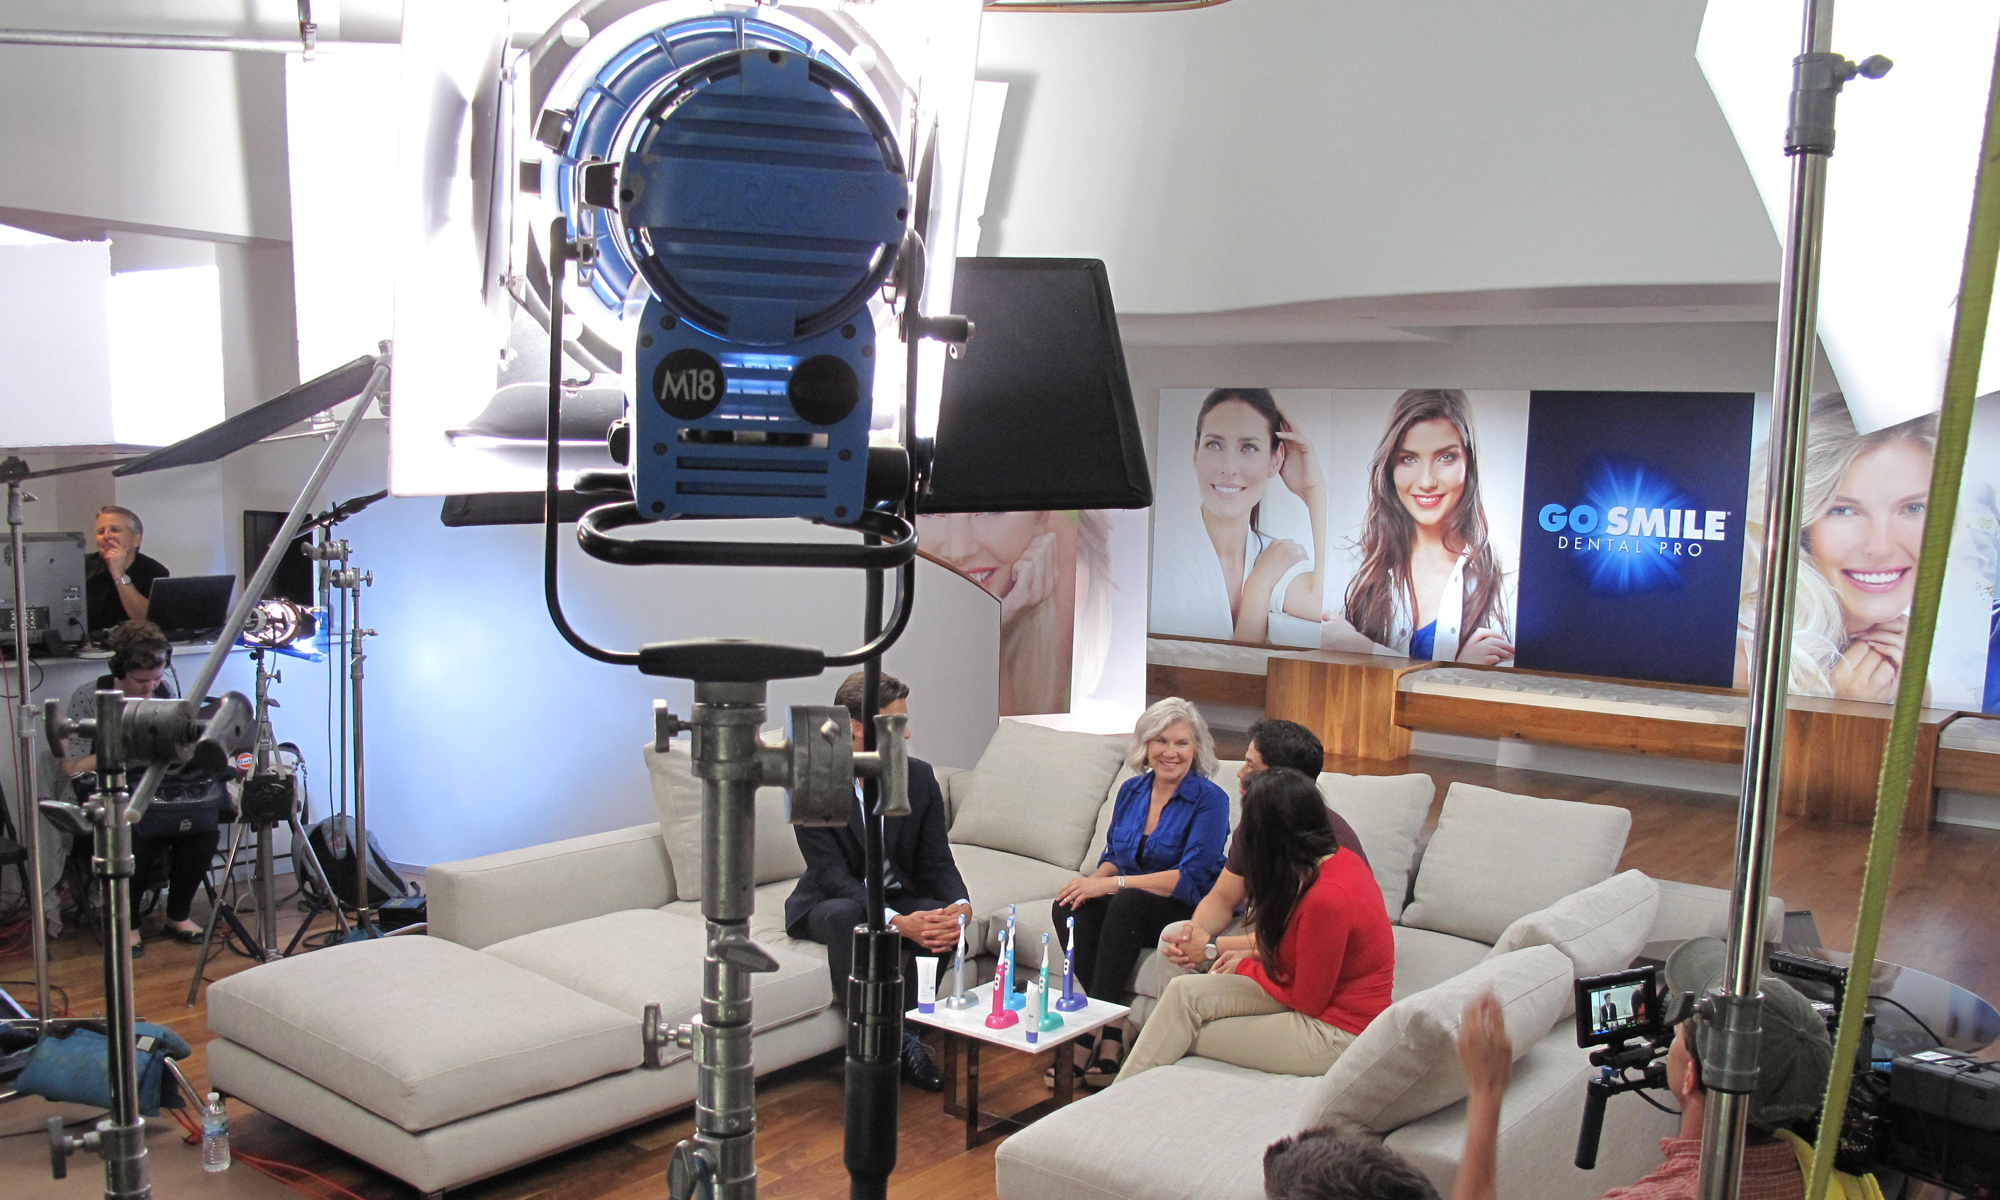 Location shot of in-house studio setting. Several people sitting in living room setting discussing Dental Pro products. M18 Light sit in foreground while other stands, flags and boxes are being used. Gaffer Lighting Truck Dallas